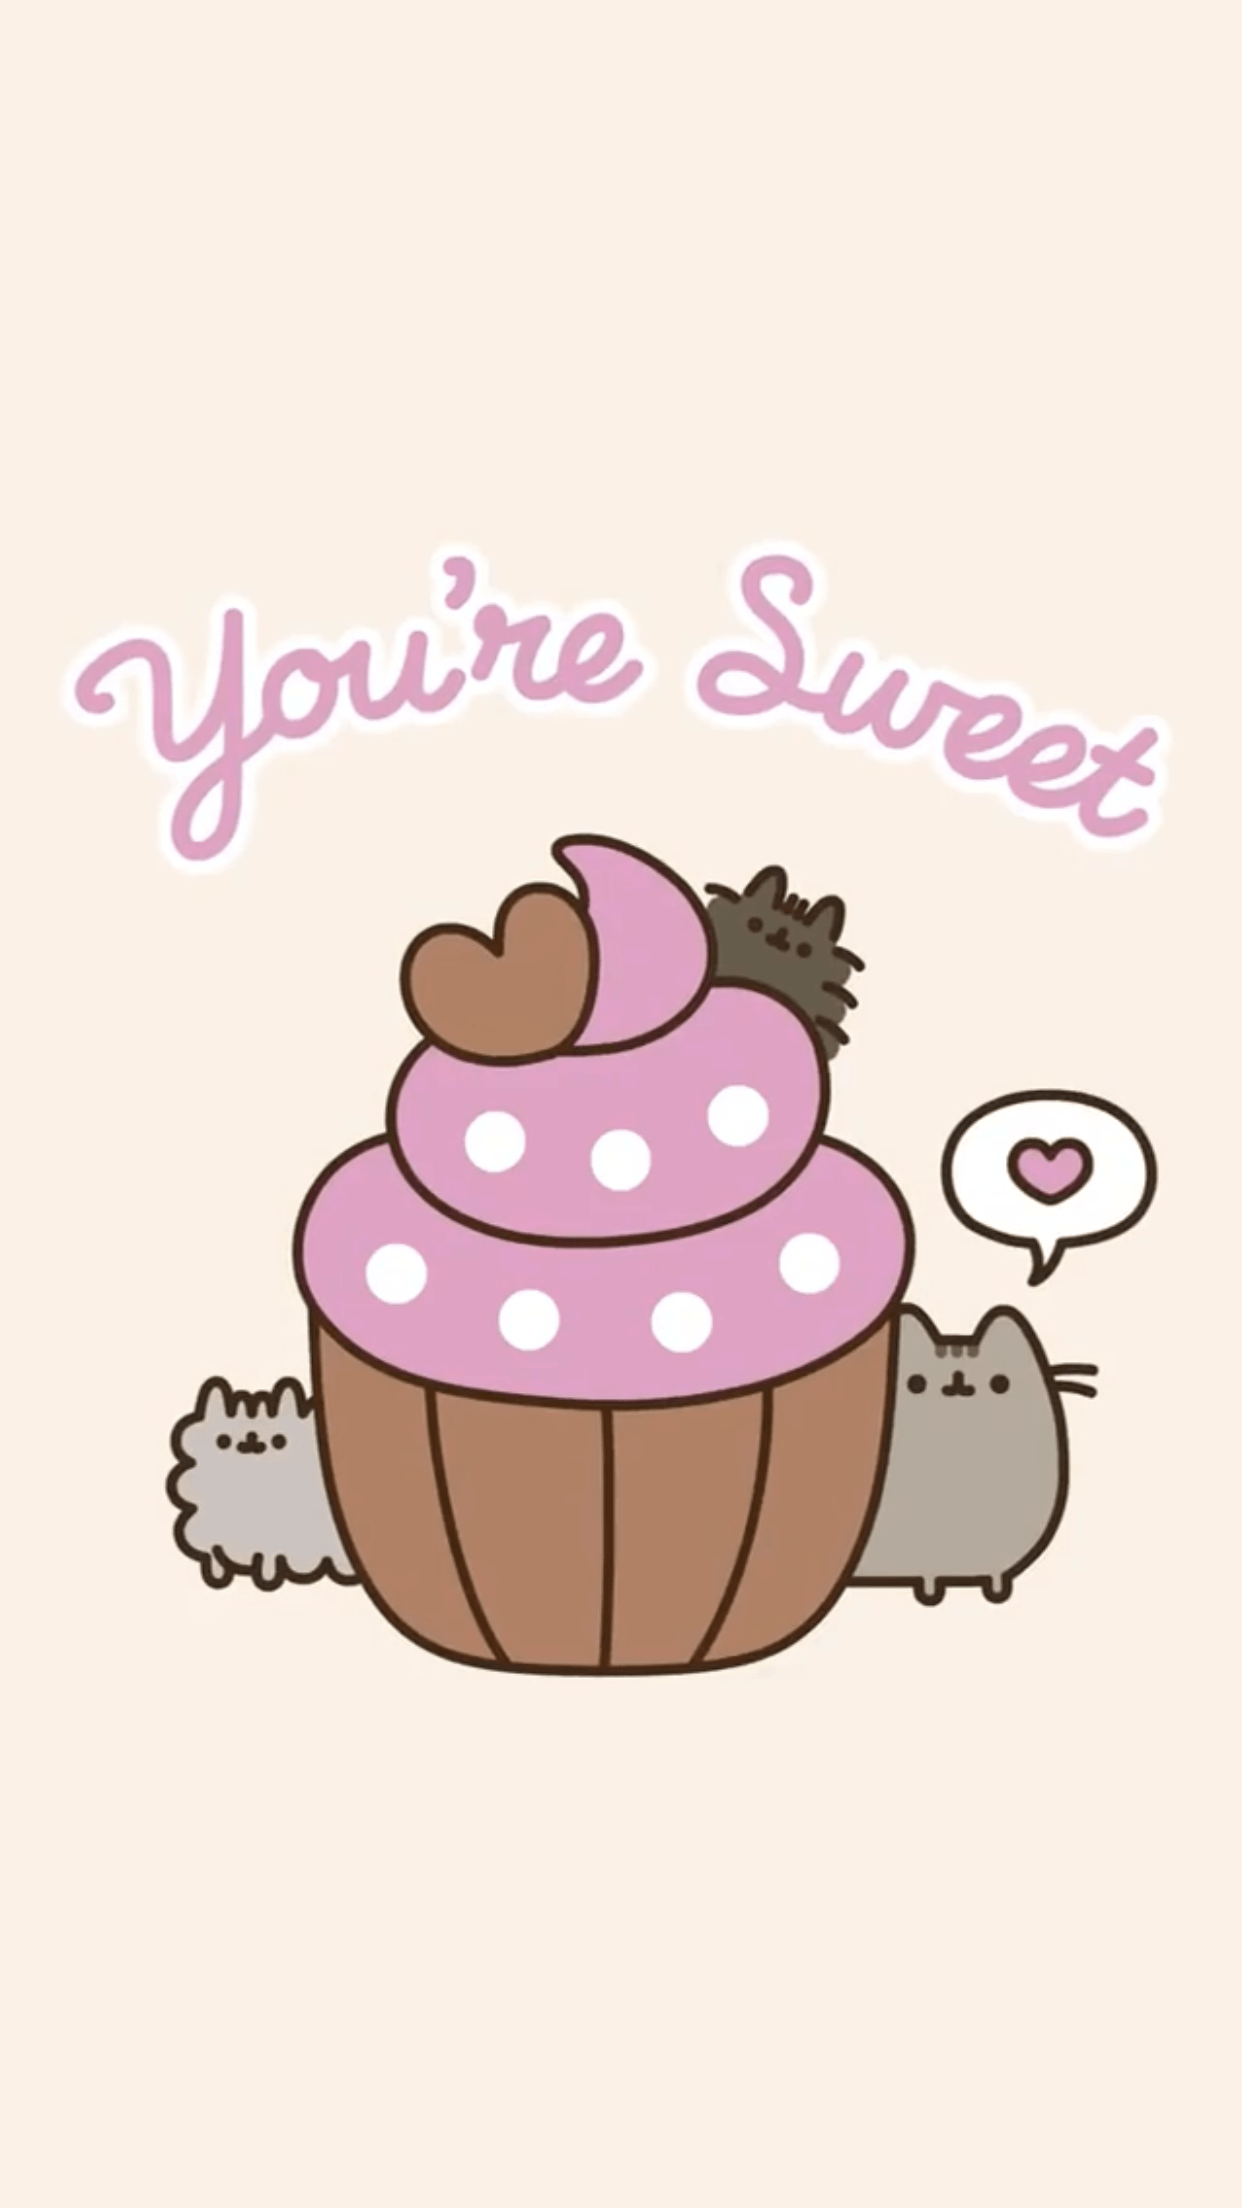 pusheen the cat iphone wallpaper valentine's day hearts